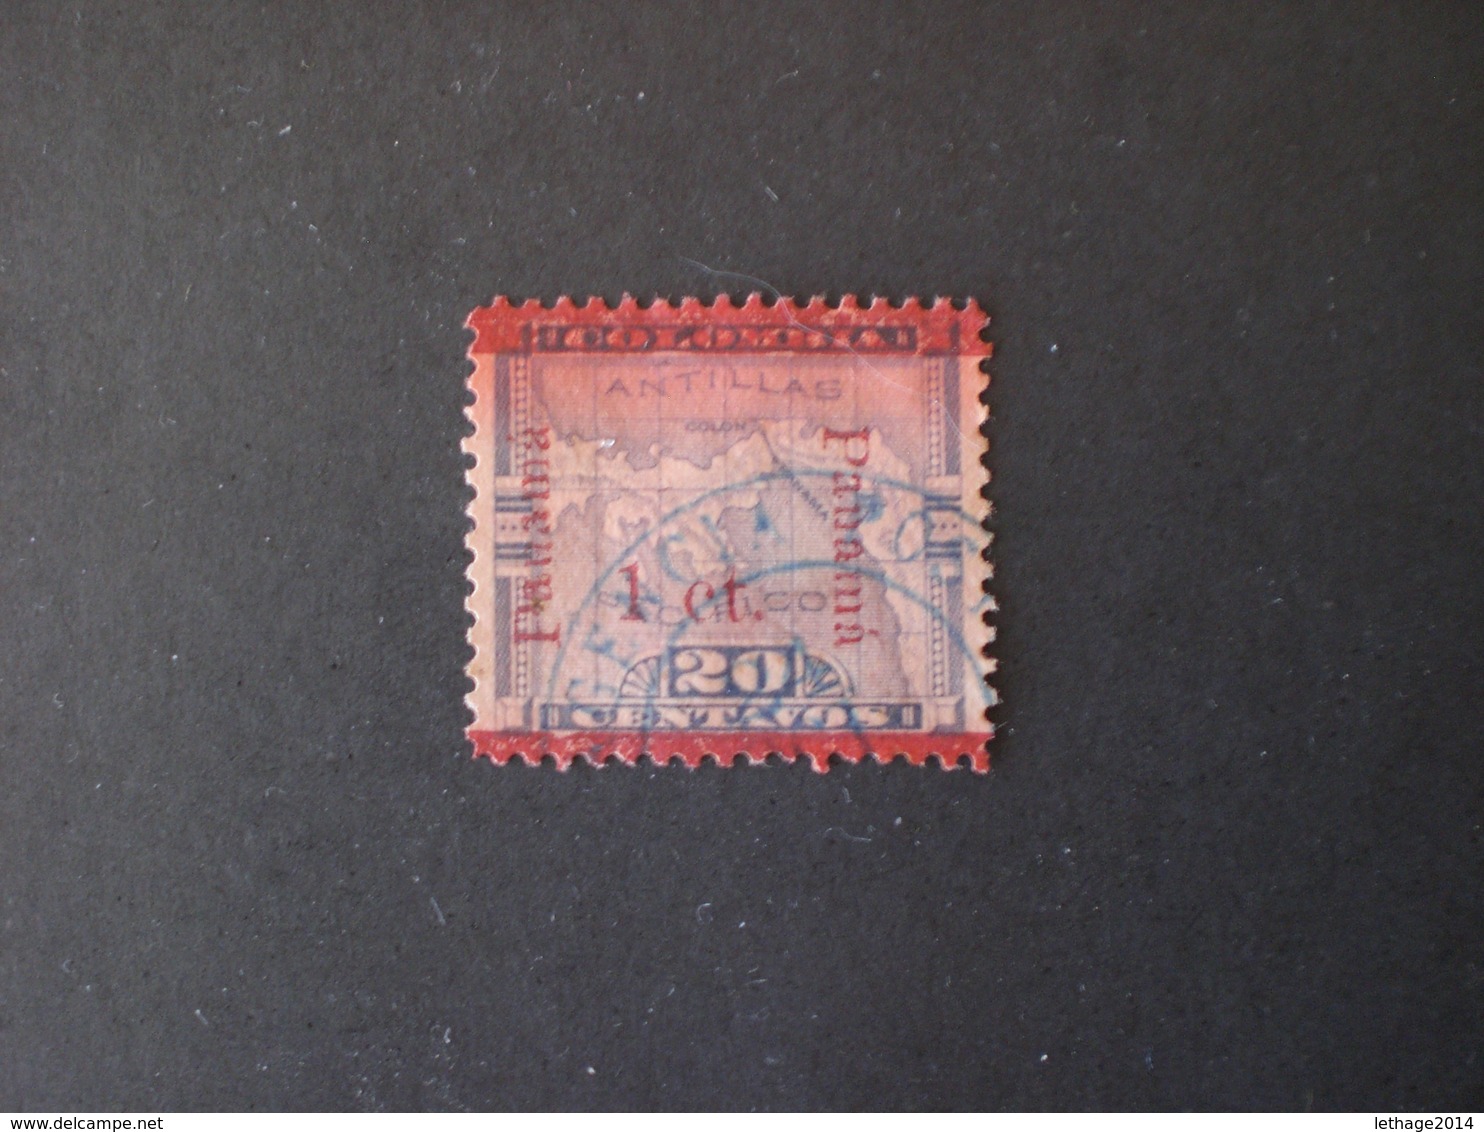 PANAMA CANAL ZONE 1906 Registartion Stamps - Handstamped Overprinted Thick Bar - Panama